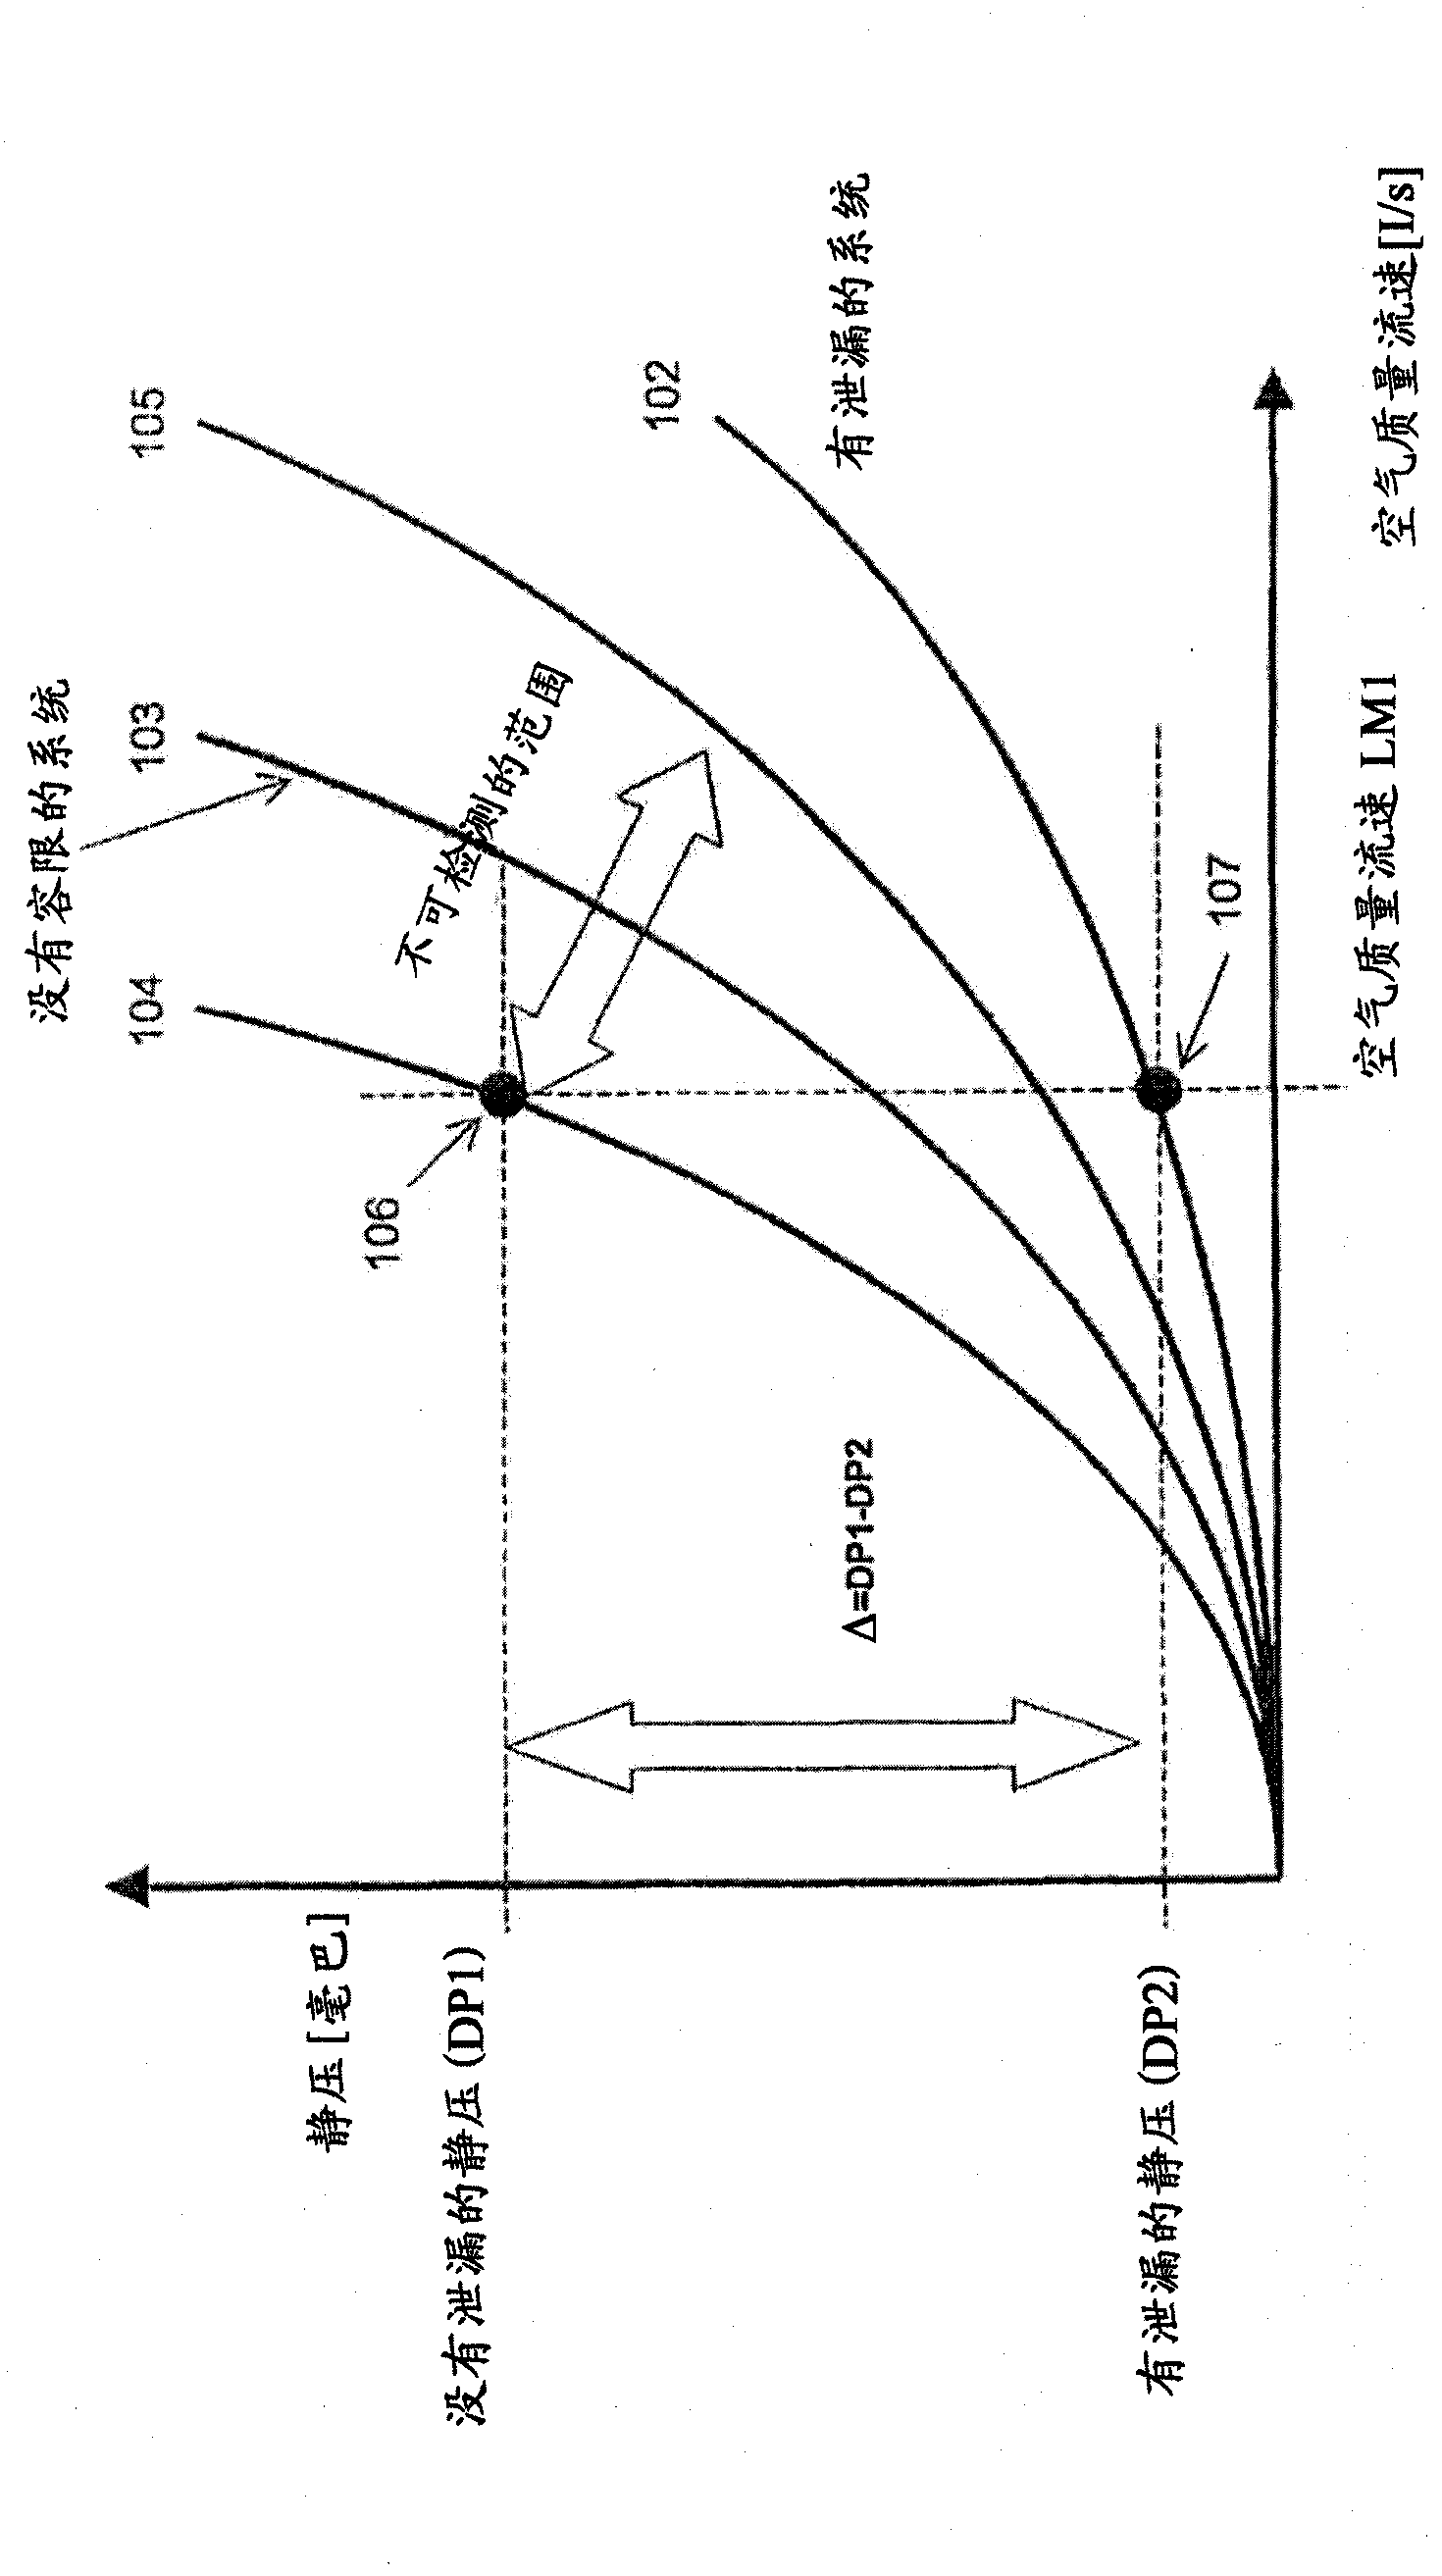 Aircraft conduit monitoring system and method